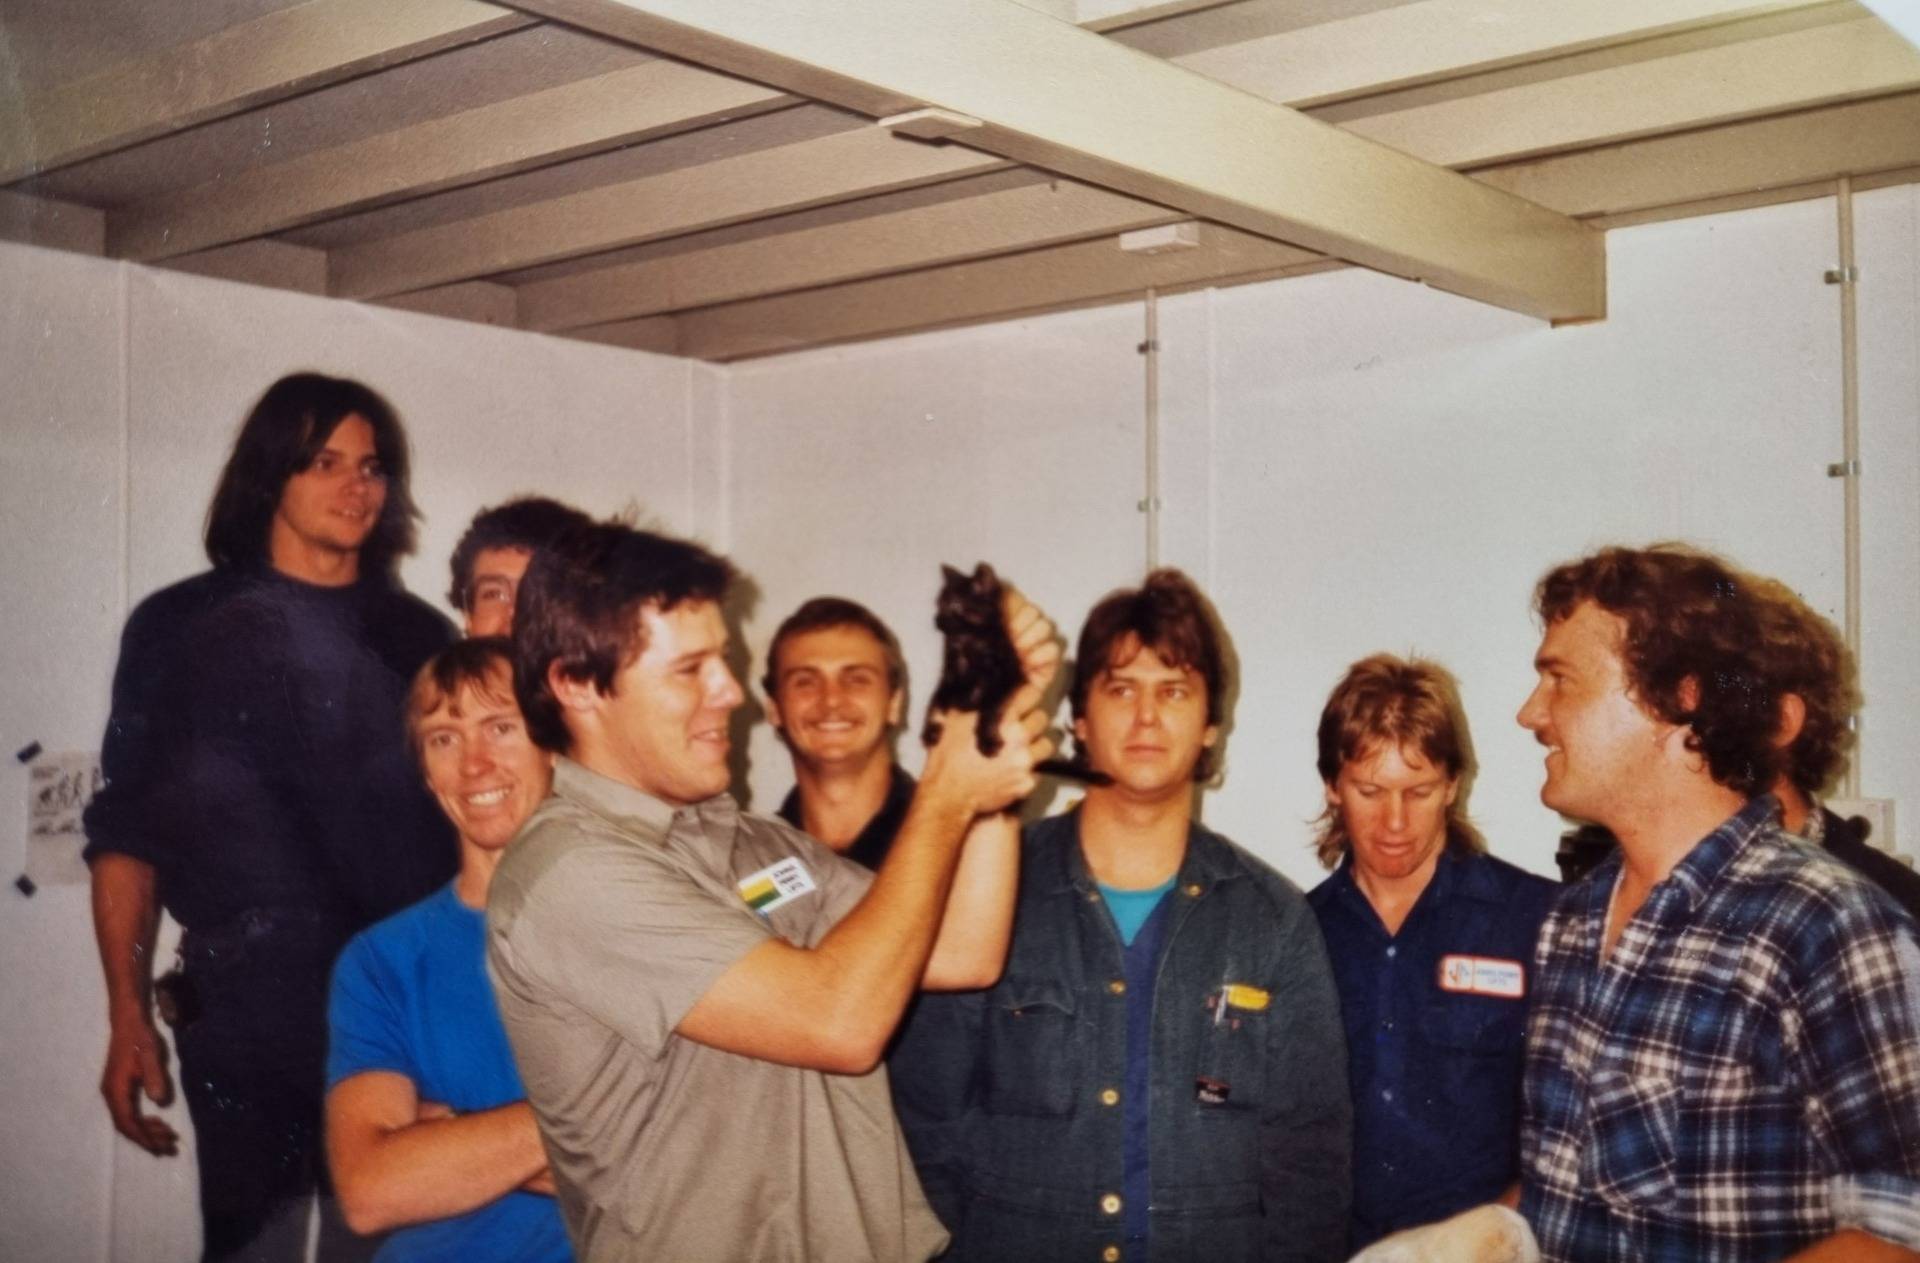 The Johns Perry Lifts crew and the kitten that became our mascot (found living in our lunch room).